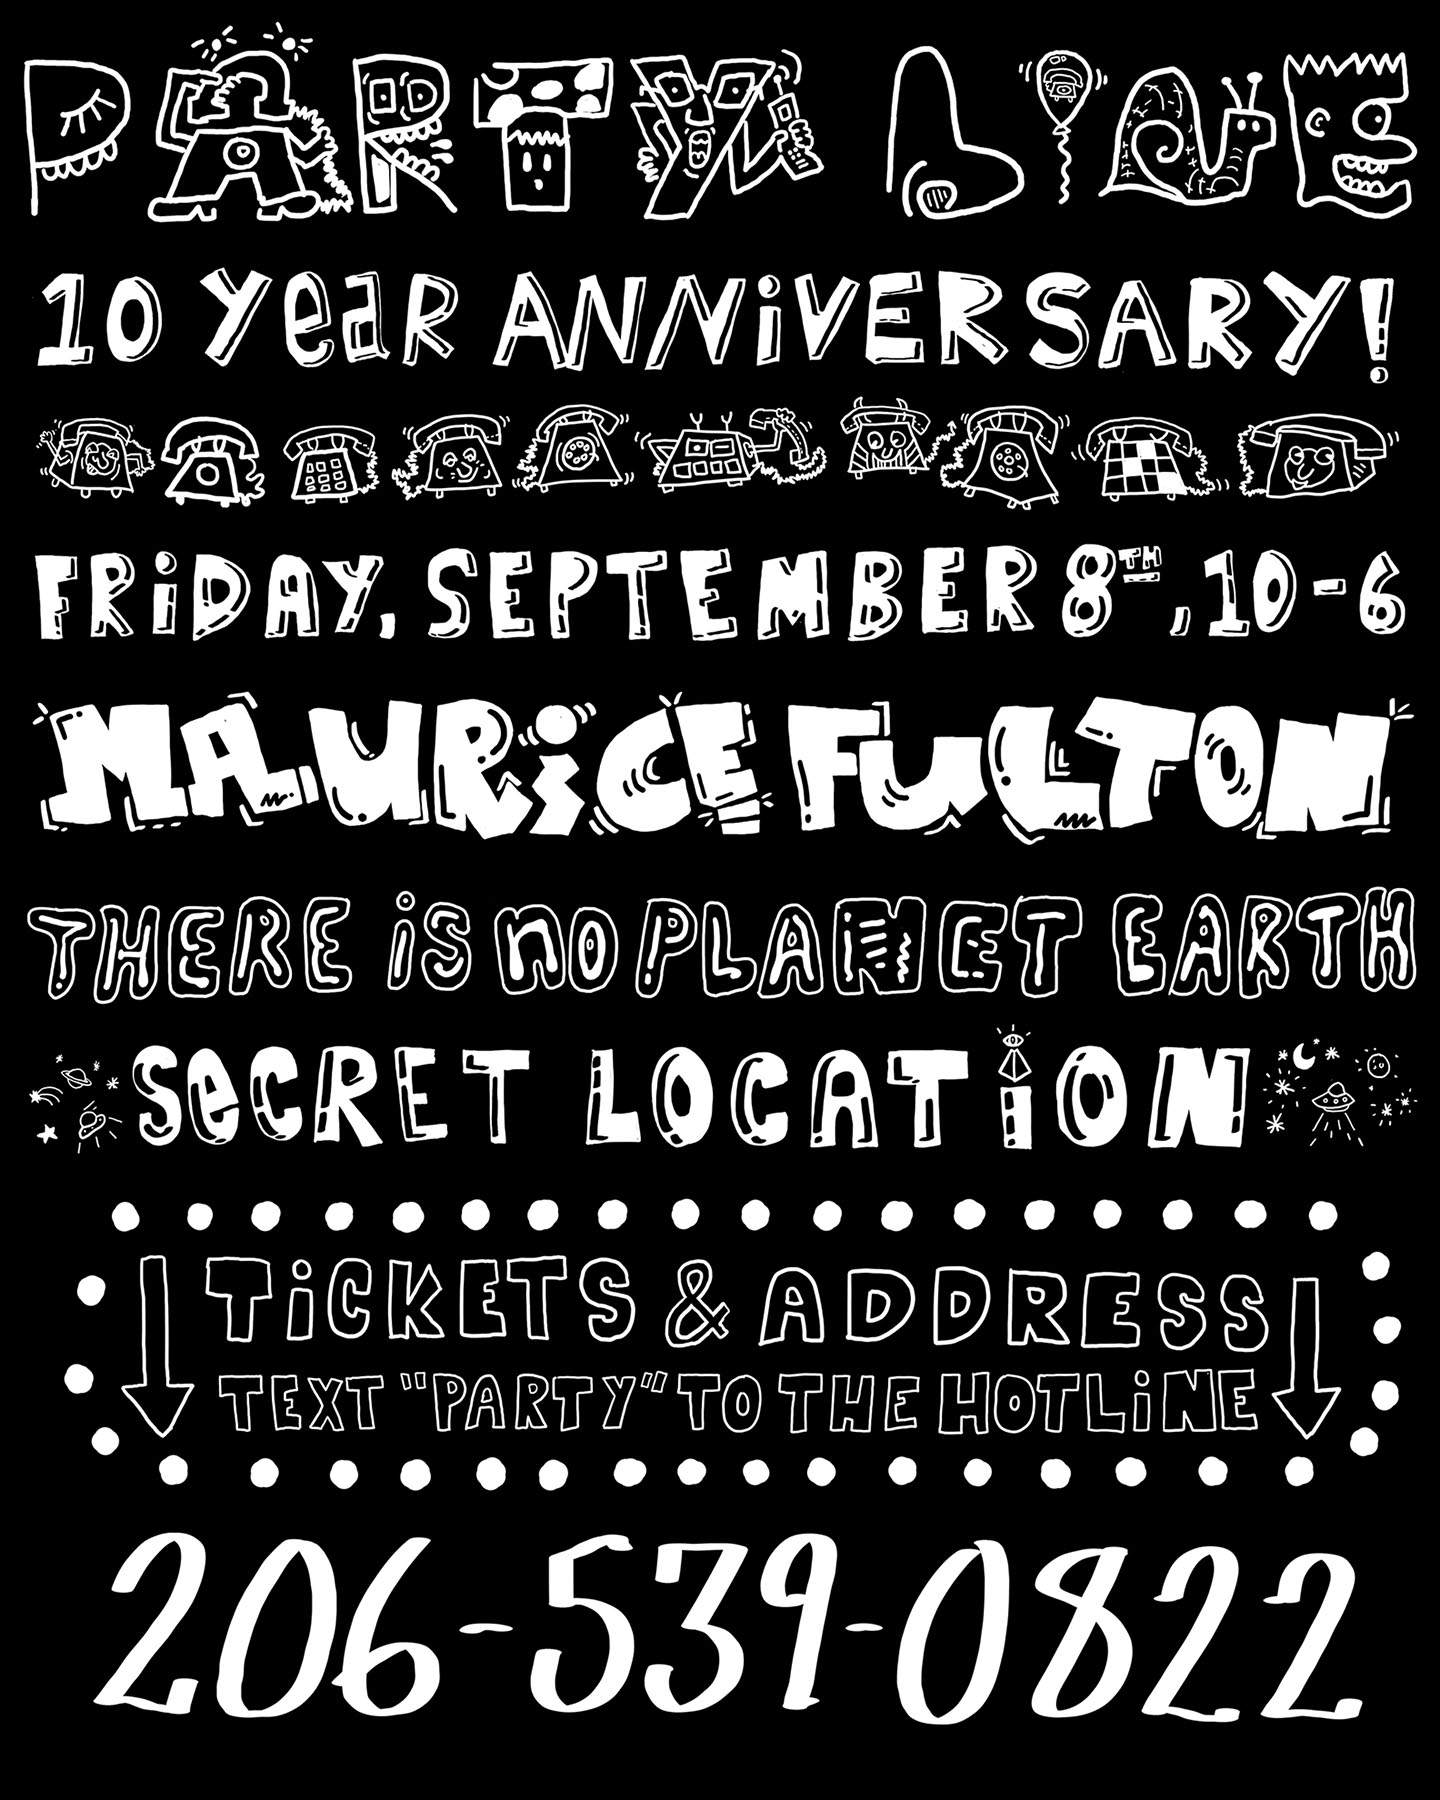 Party Line 10 Year Anniversary w Maurice Fulton & There Is No Planet Earth - Página frontal